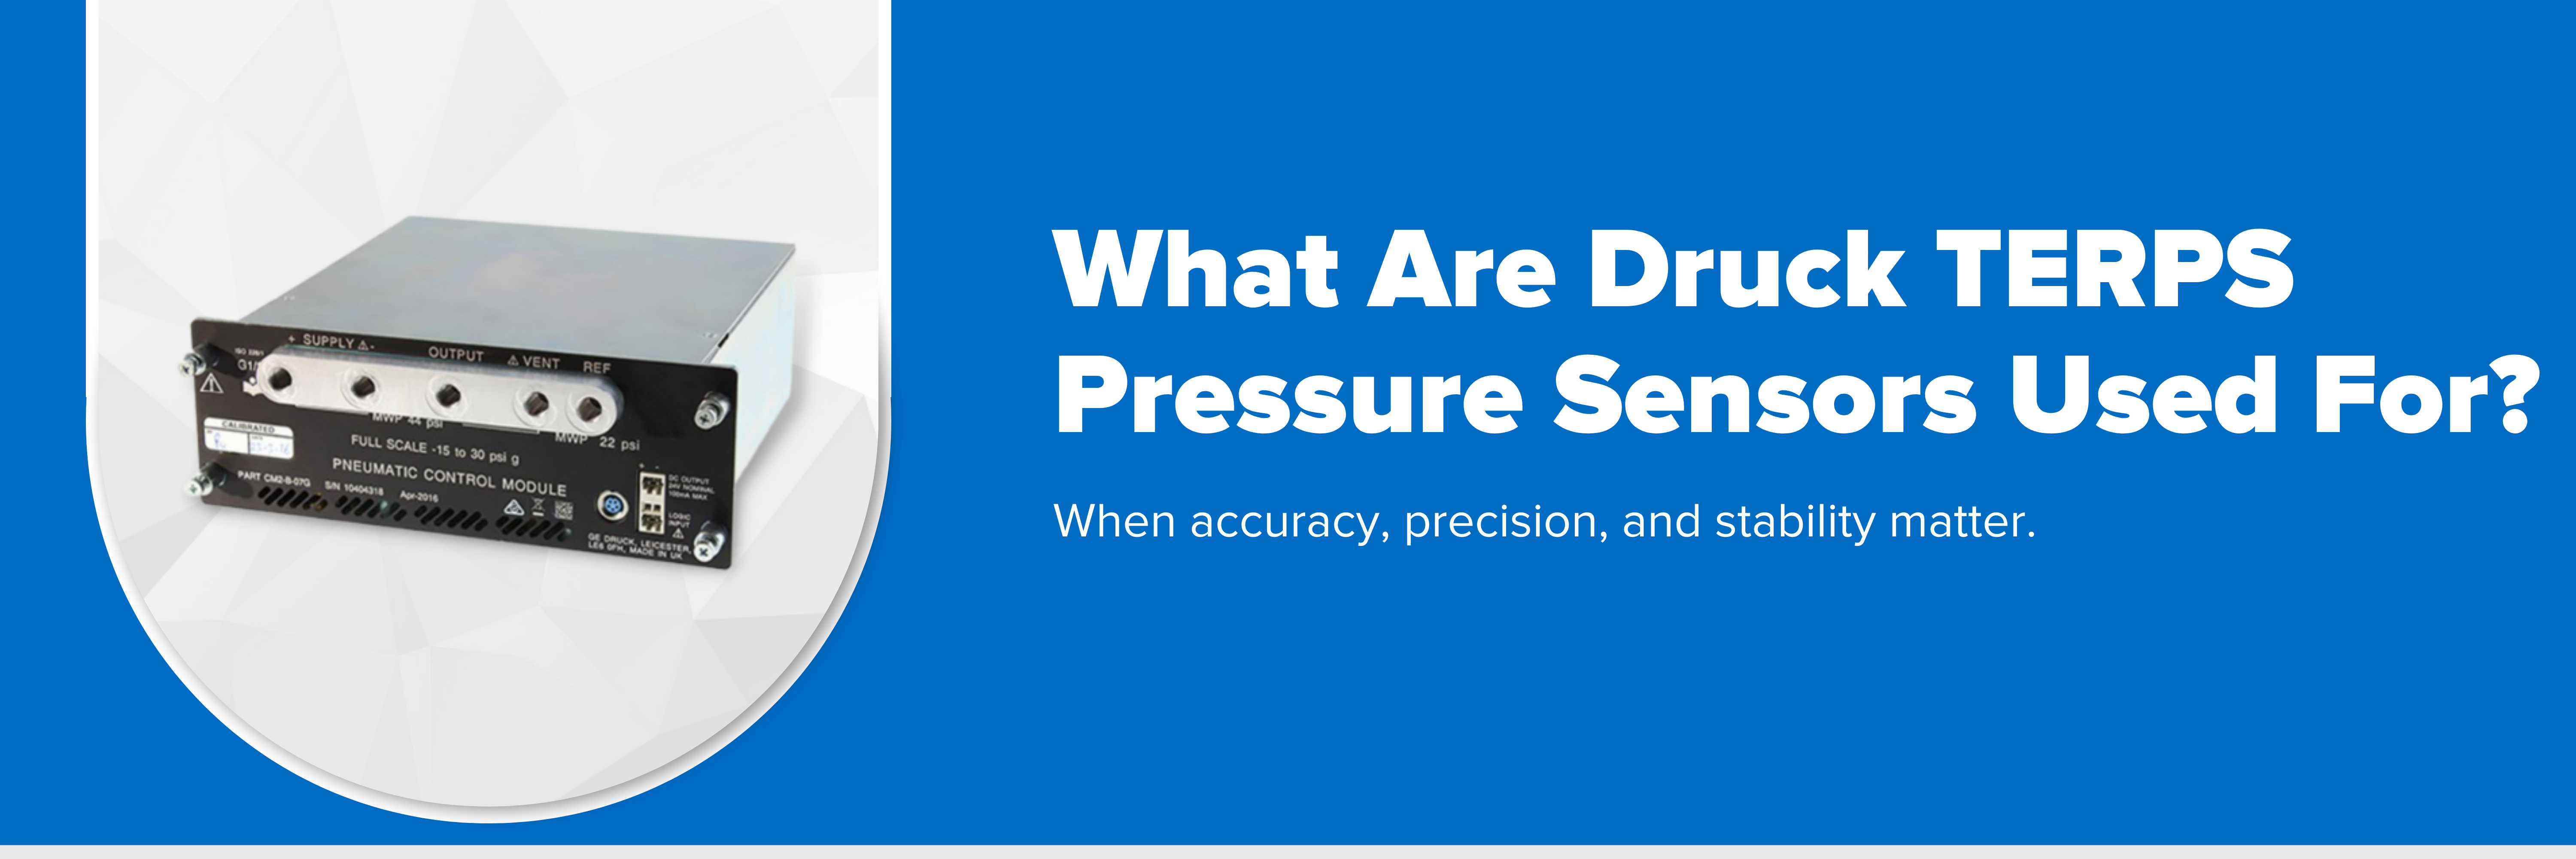 Header image with text "What Are Druck TERPS Pressure Sensors Used For?"